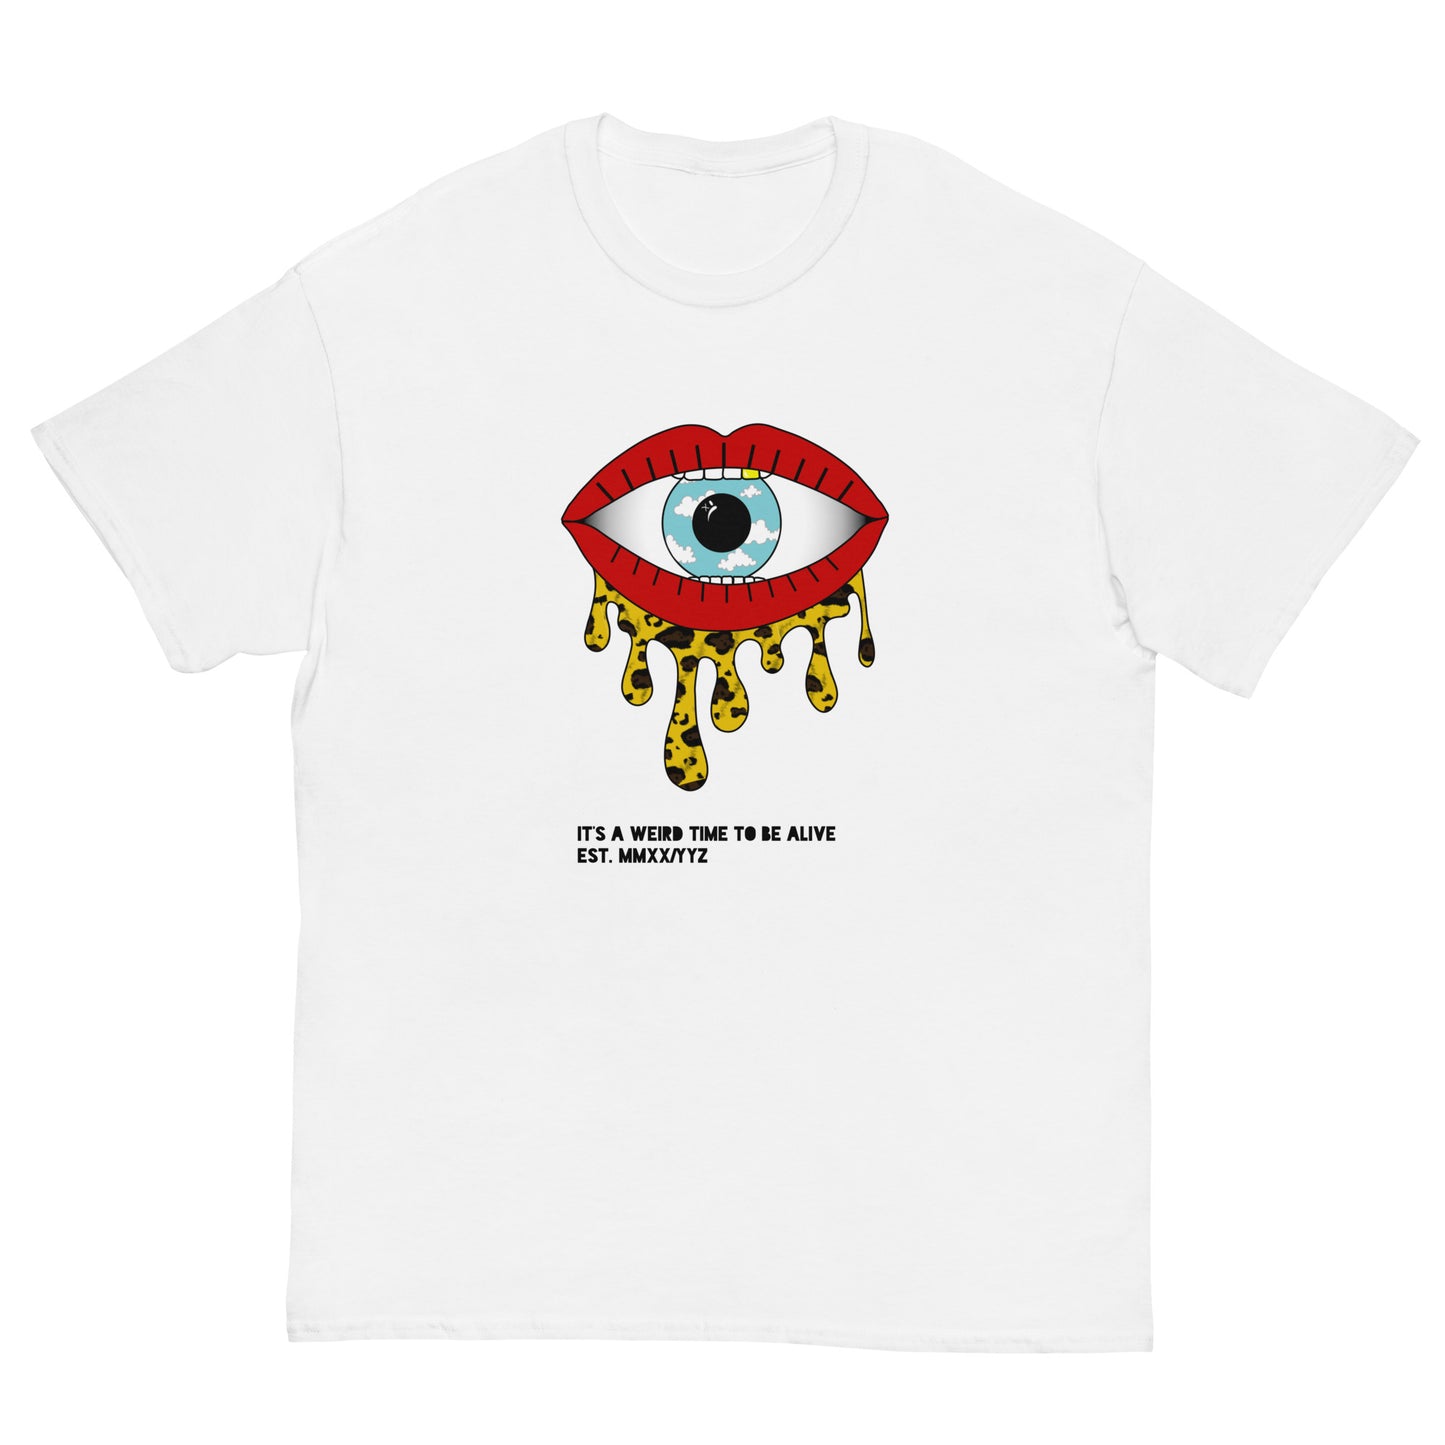 All Seeing Deny classic tee